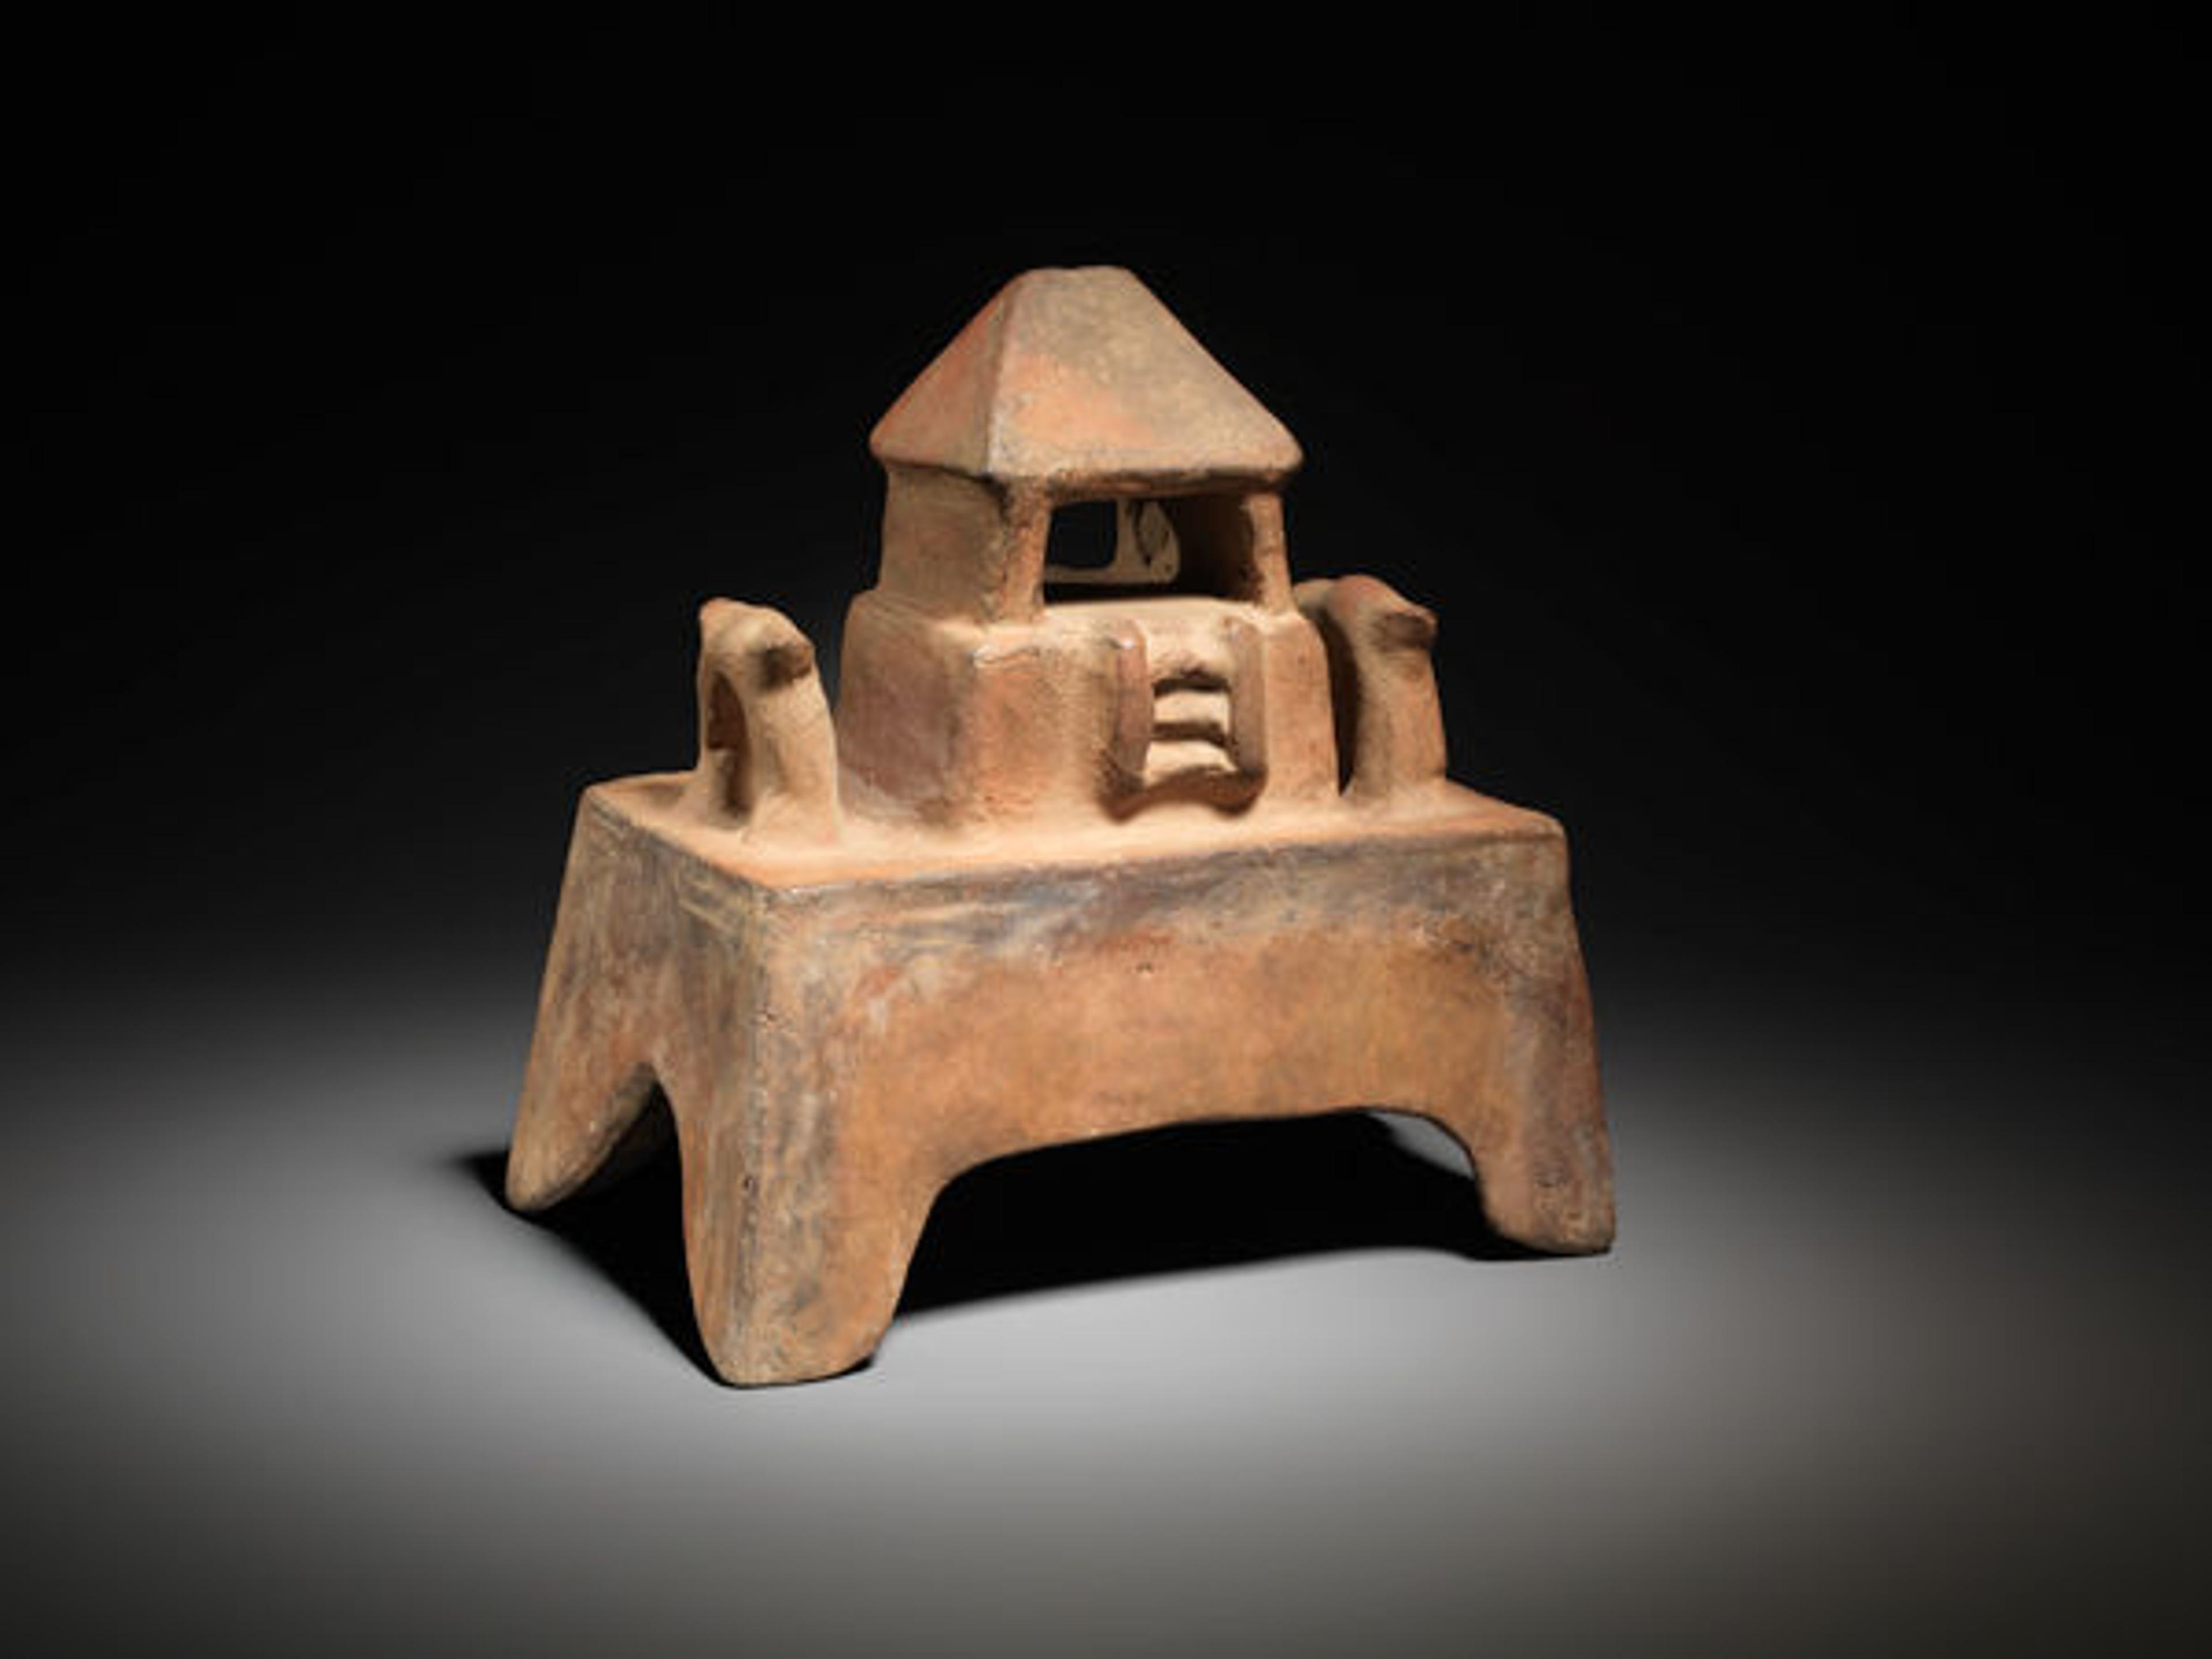 This small platform surmounted by a temple with a peaked roof may have once served as the lid for an incense burner. Temple model, 200 B.C.–A.D. 300. Colima, Mexico. Ceramic; H. 7 1/8 in. The Metropolitan Museum of Art, New York, From the Collection of Nina and Gordon Bunshaft, Bequest of Nina Bunshaft, 1994 (1995.63.5)